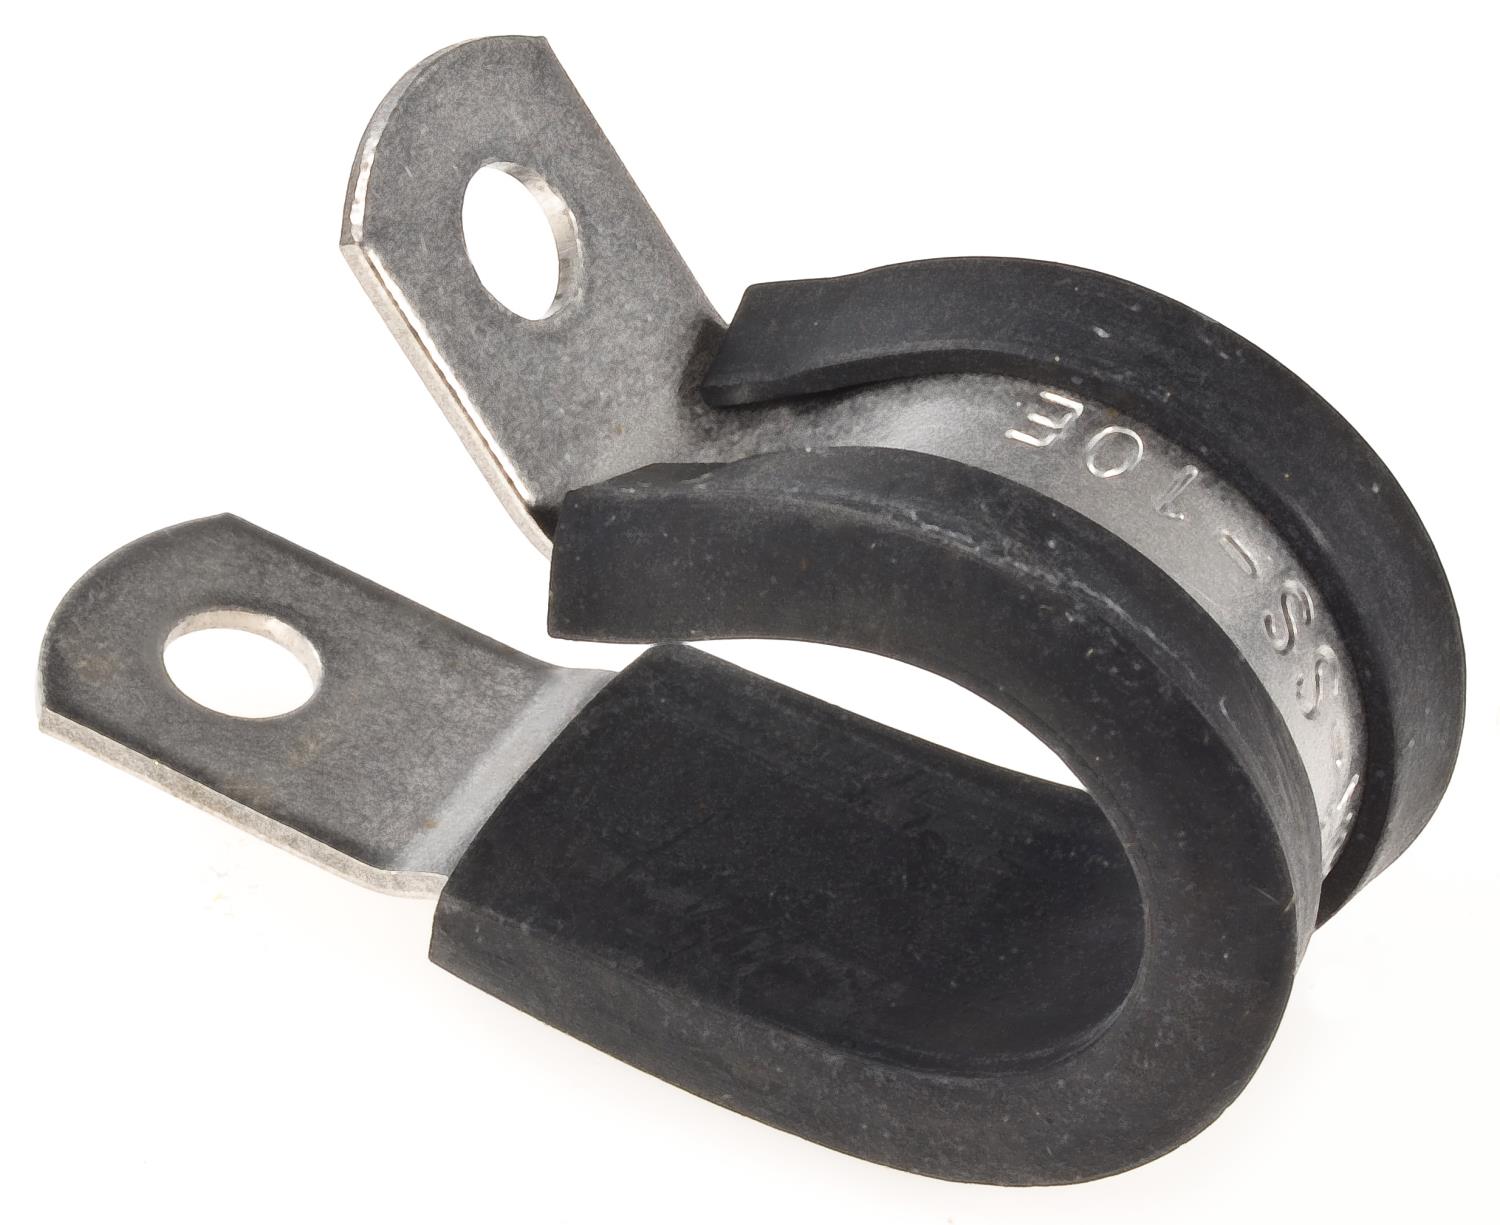 Stainless Steel Cushion Clamps [Fits -8 AN Hose]